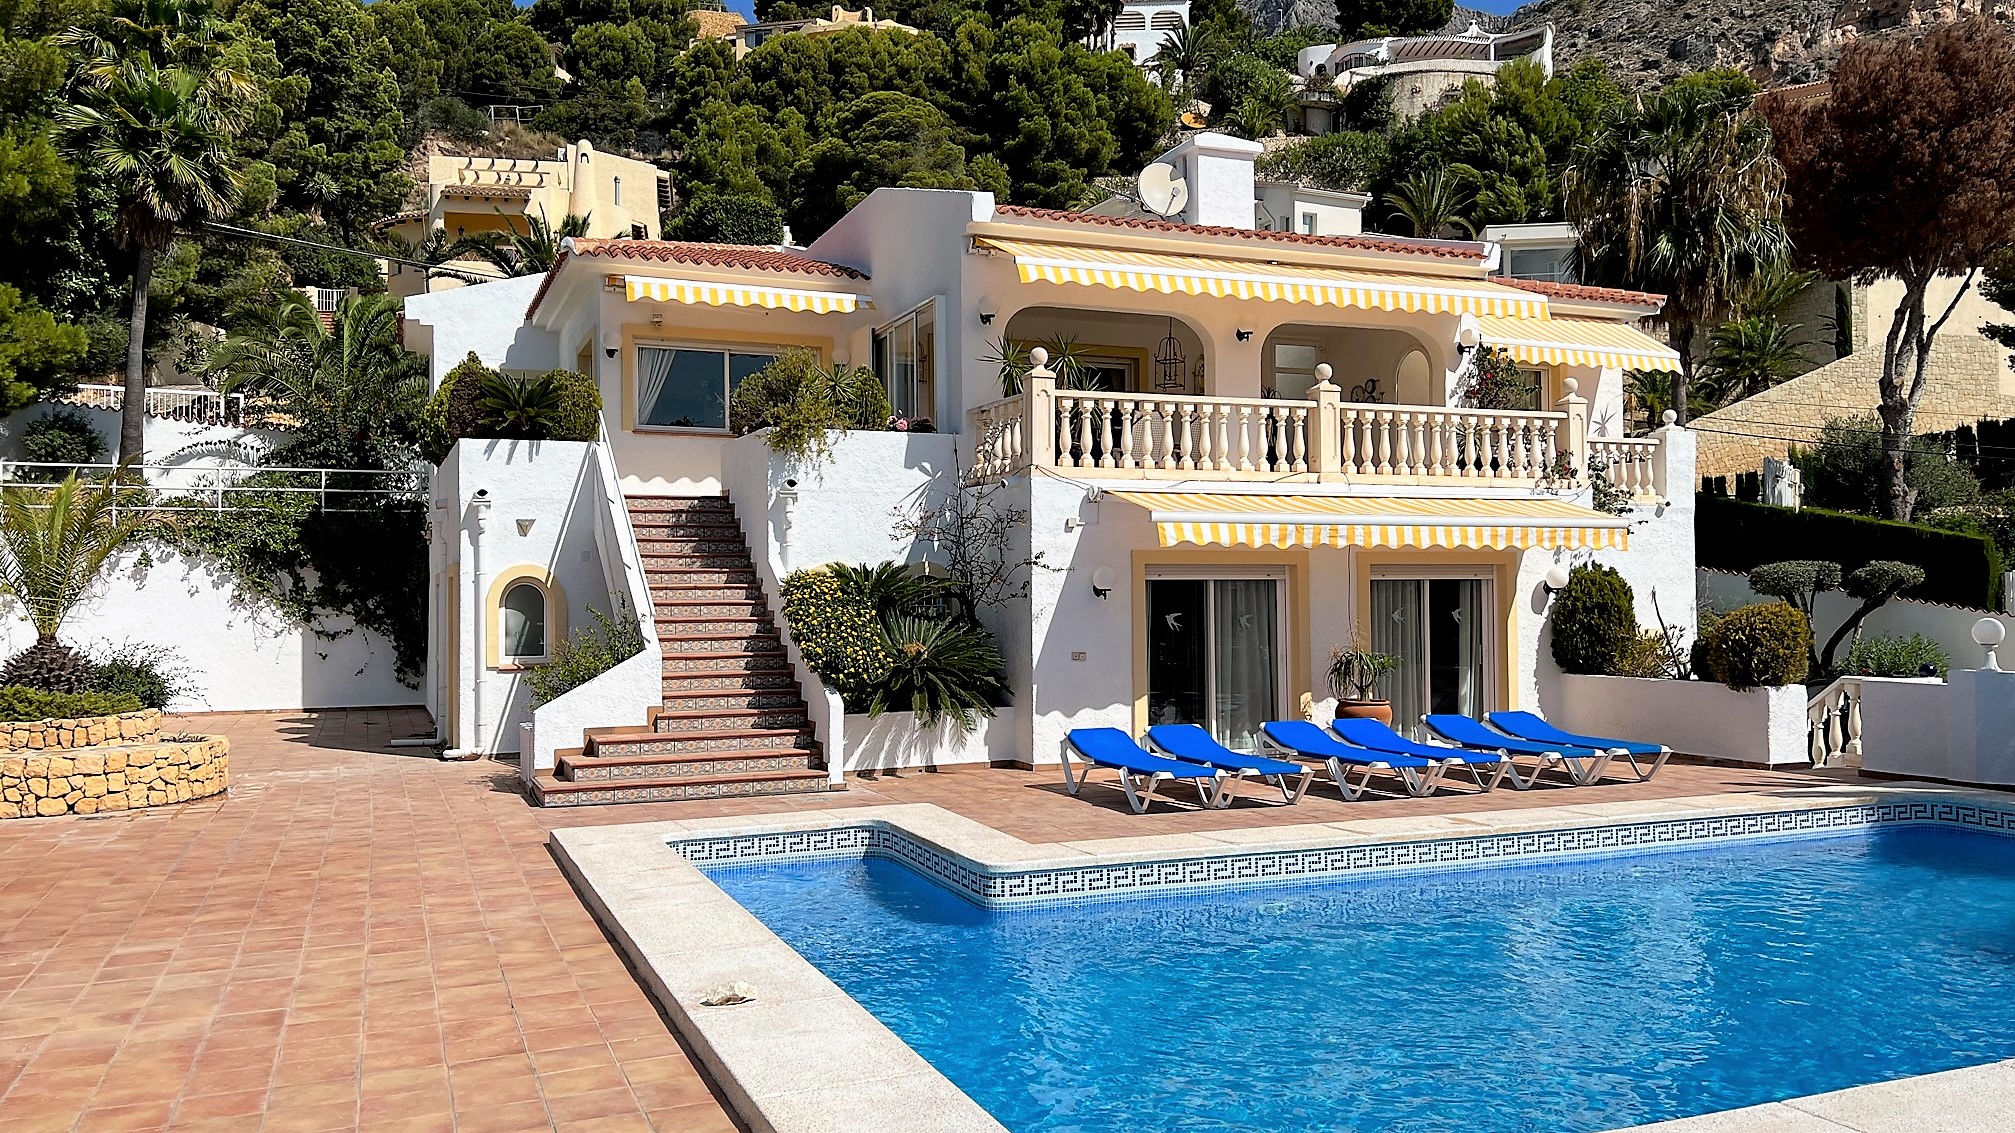 Well maintained villa with sea views in Altea
dJ